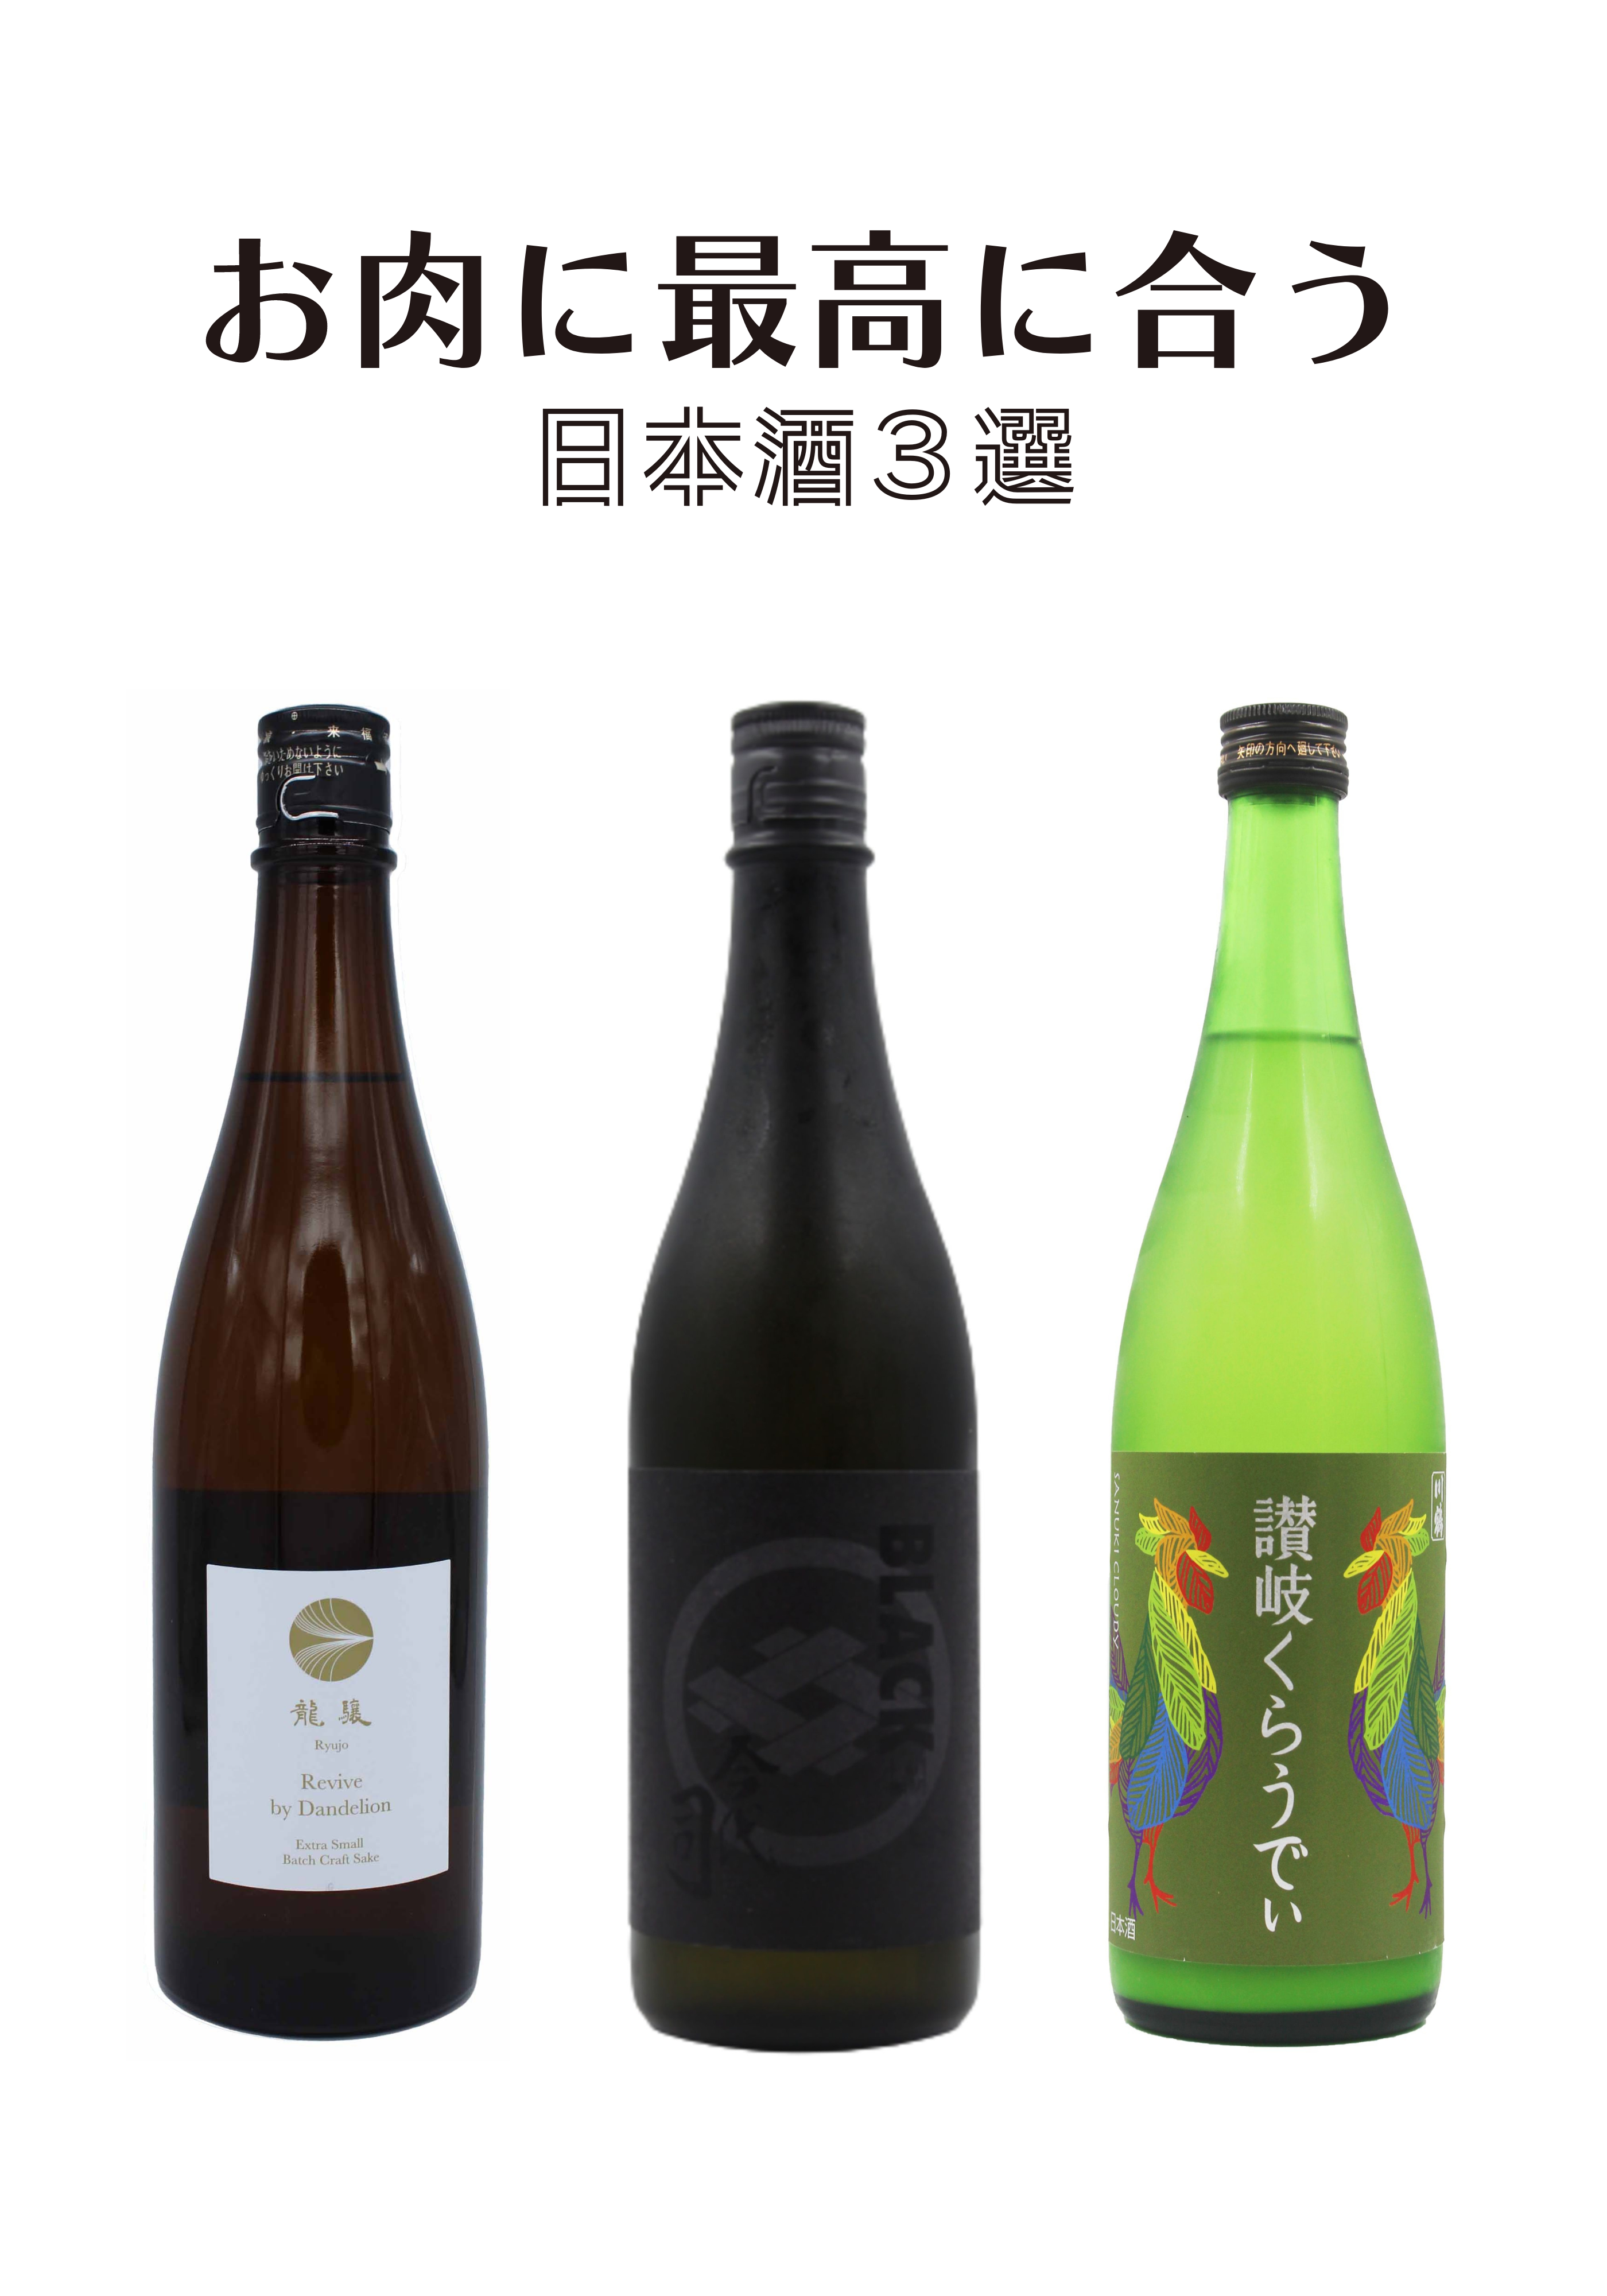 3 sake selections that go well with meat